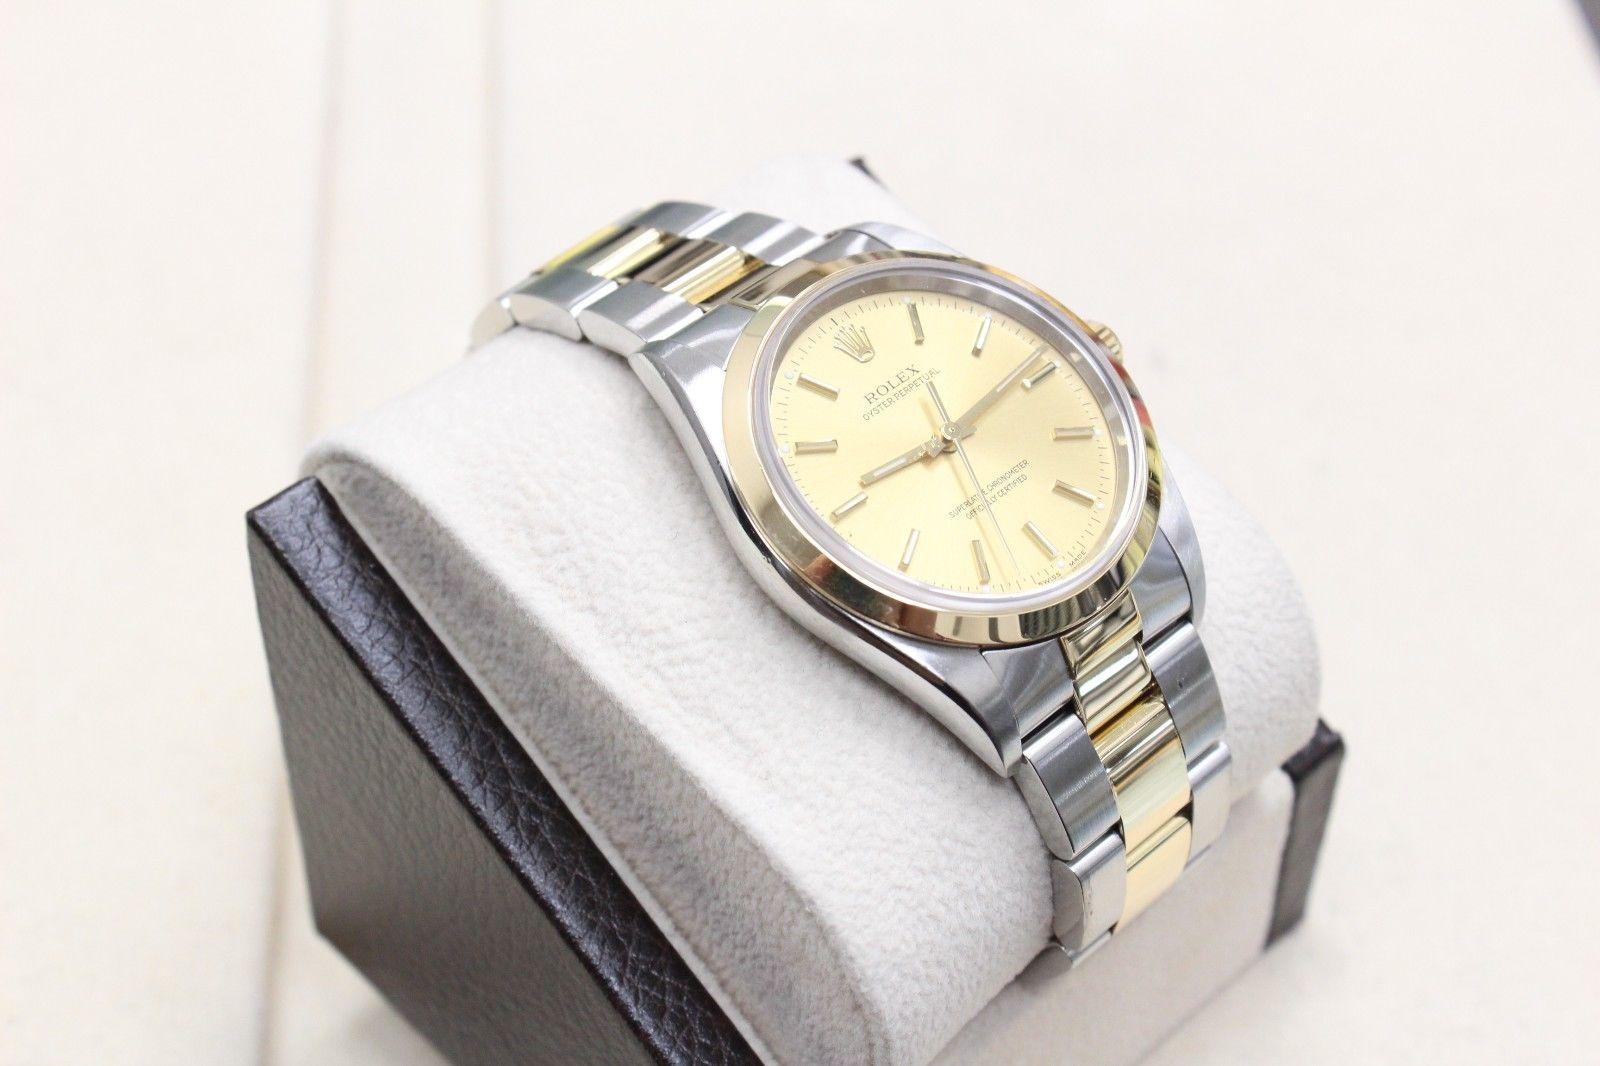 Style Number: 14203

Serial: Y300***

Model: OYSTER PERPETUAL

Case: 34mm 

Band: 18K Yellow Gold & Stainless Steel 

Bezel: 18K Yellow Gold 

Dial: Champagne 

Face: Sapphire Crystal 

Case Size: 34mm

Includes: 

- Rolex Box & Papers

-Certified